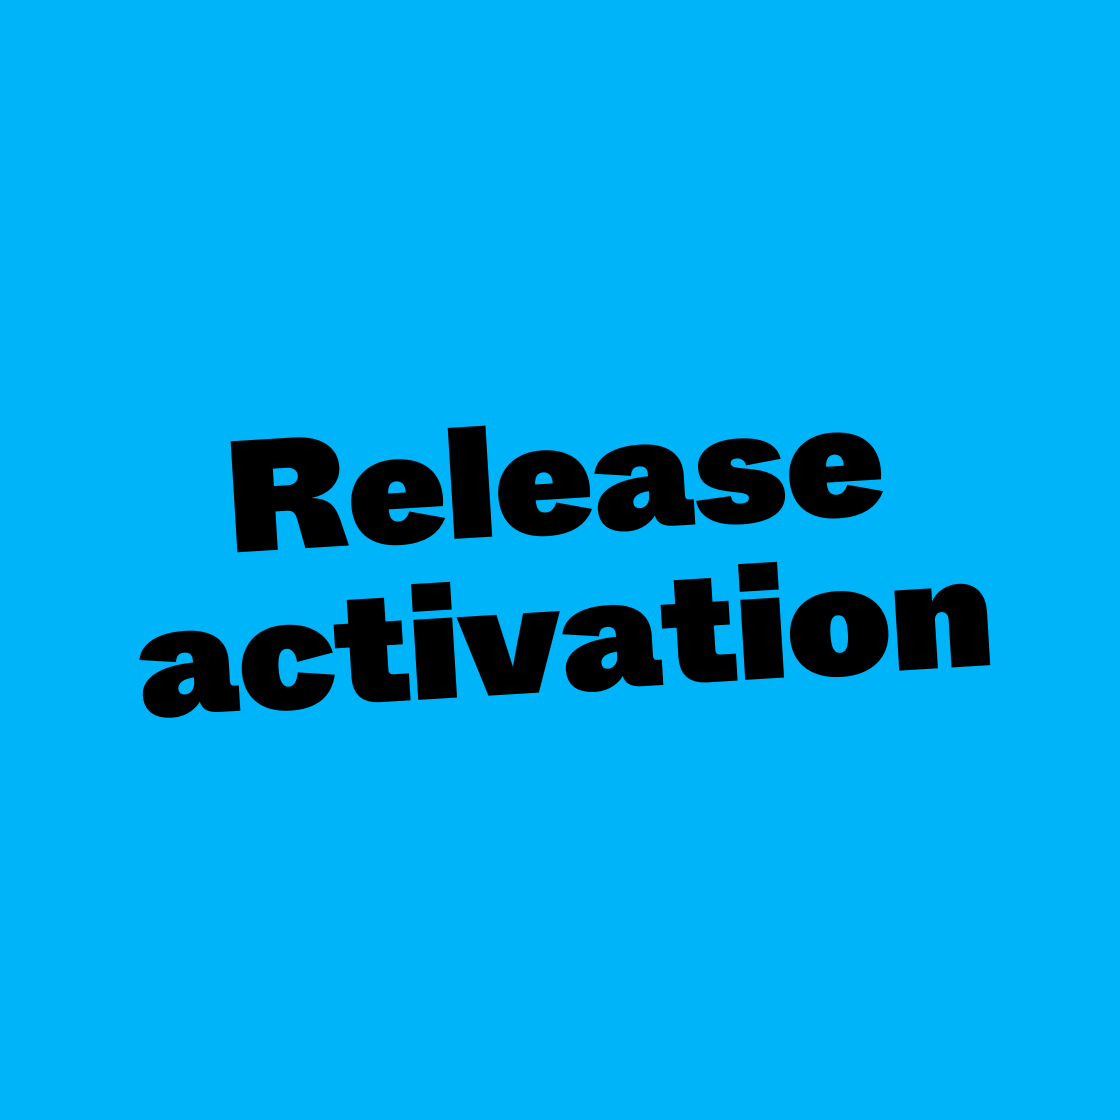 Release activation